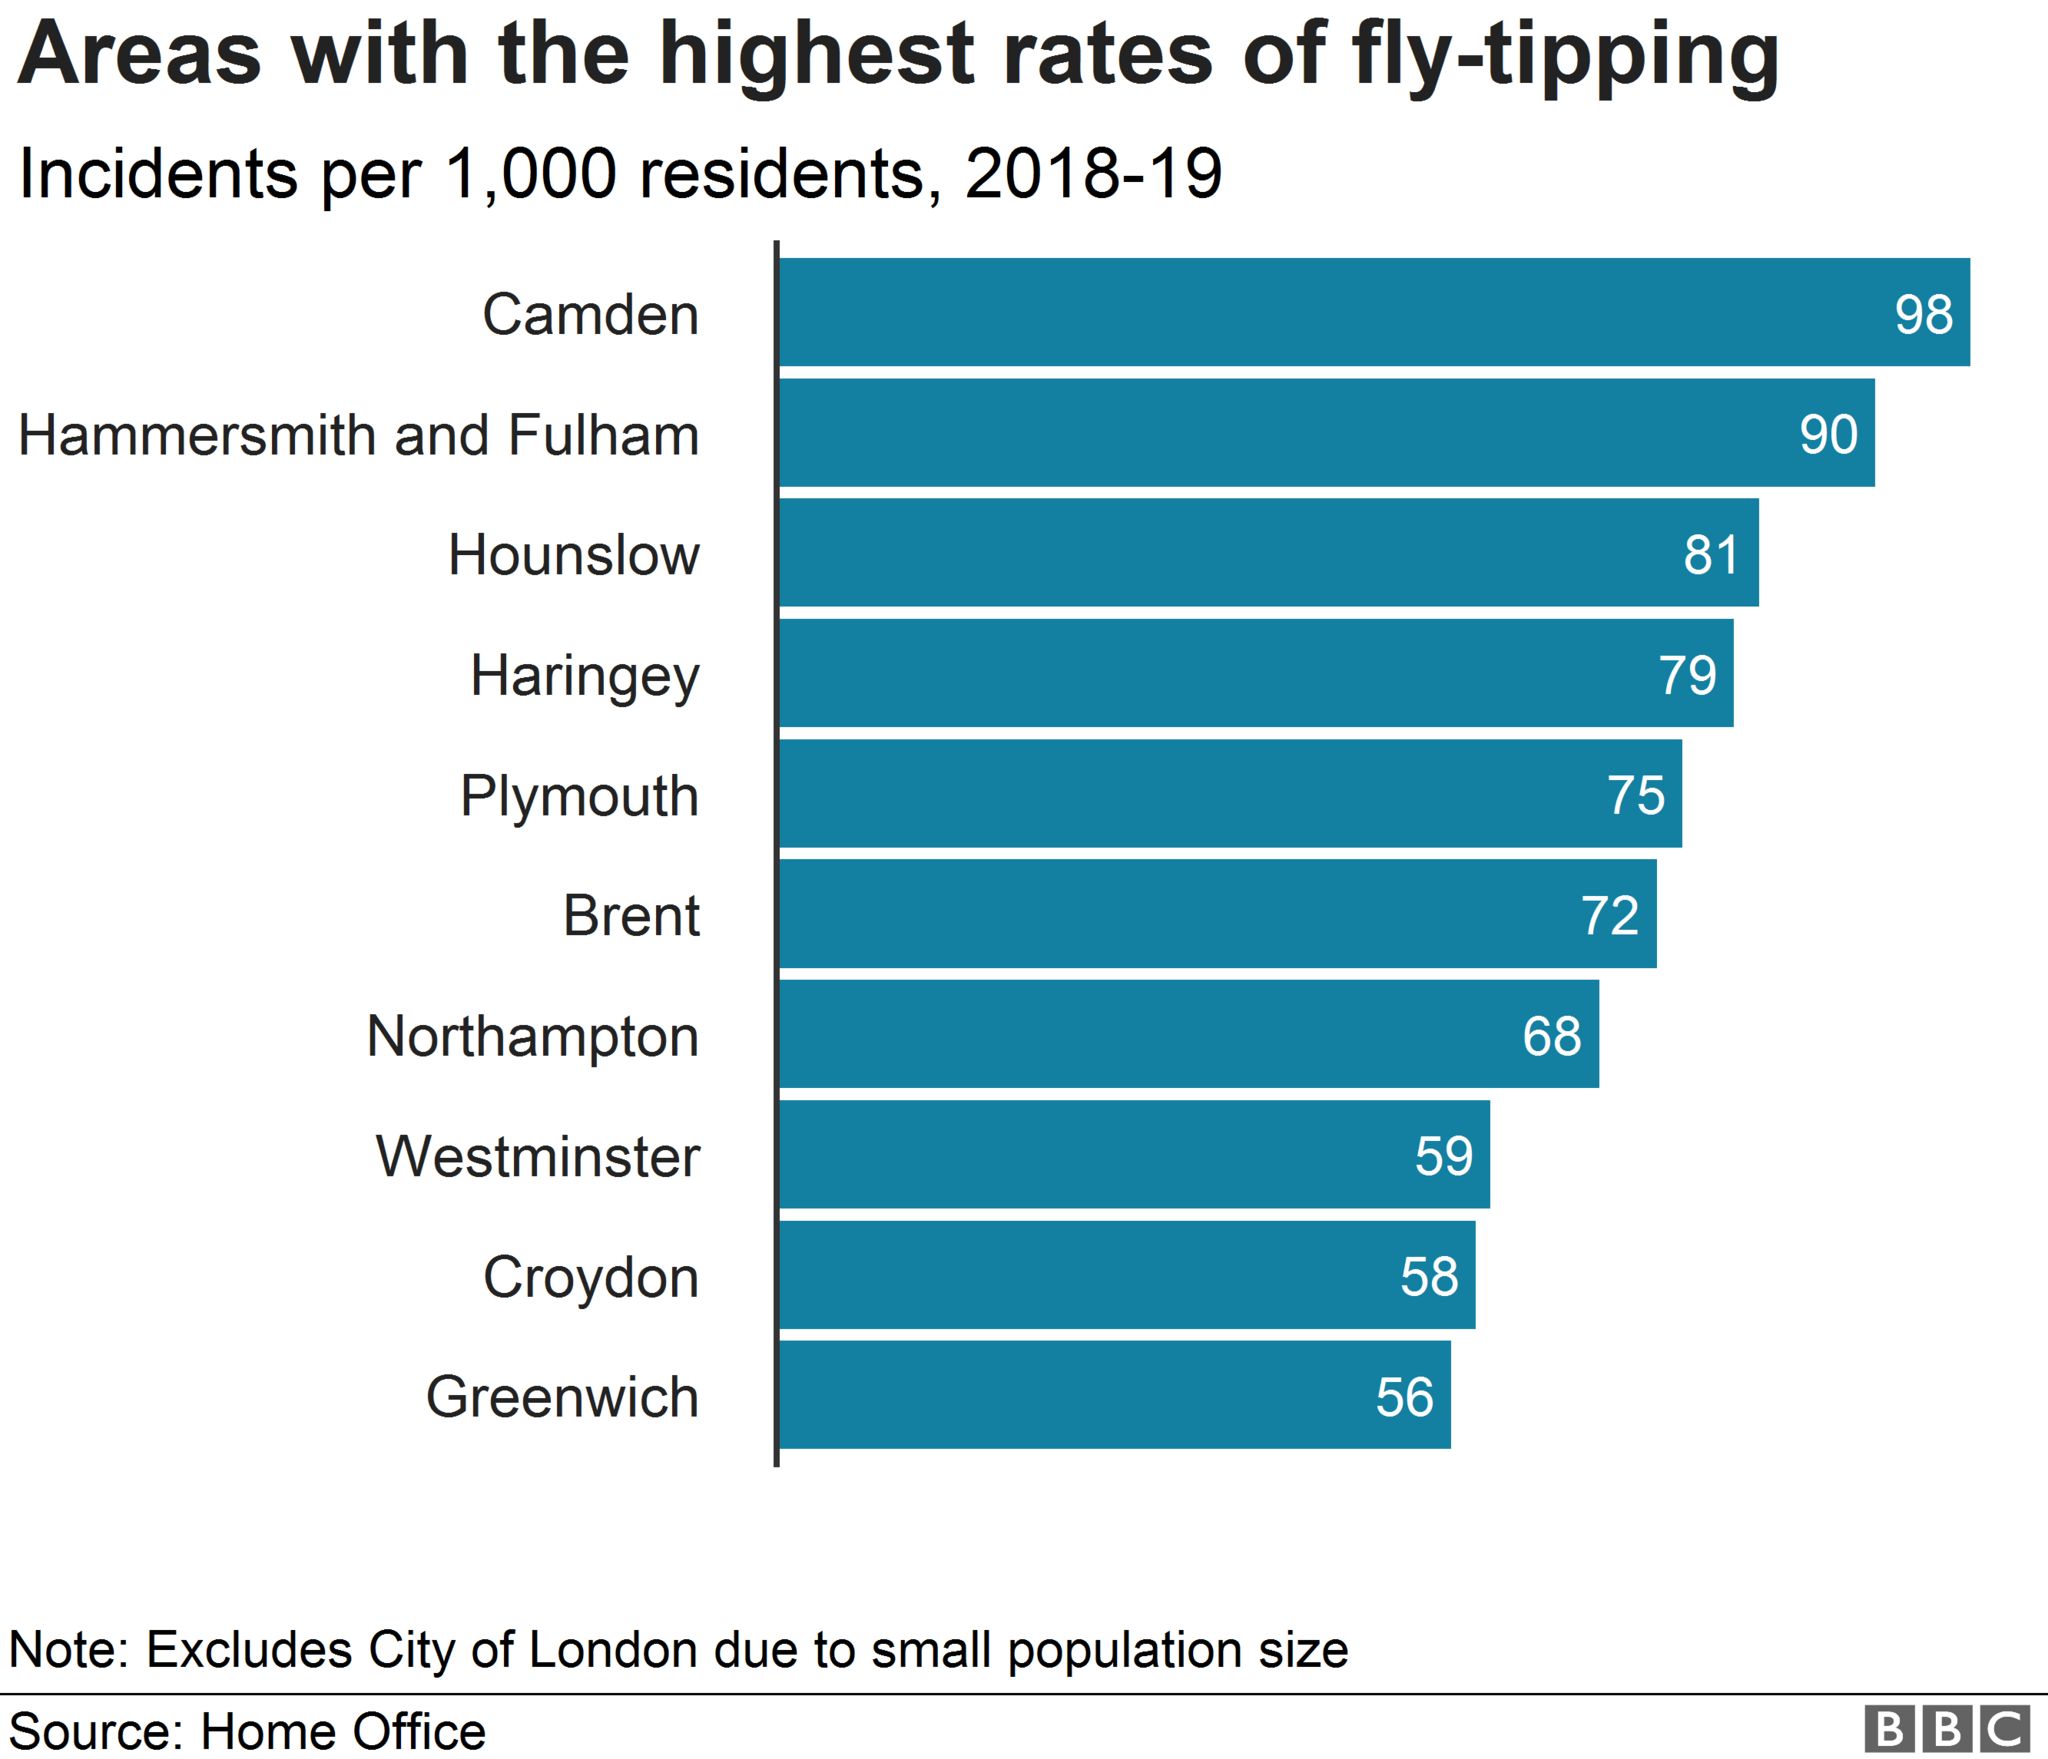 Fly-tipping: One million incidents reported across England - BBC News